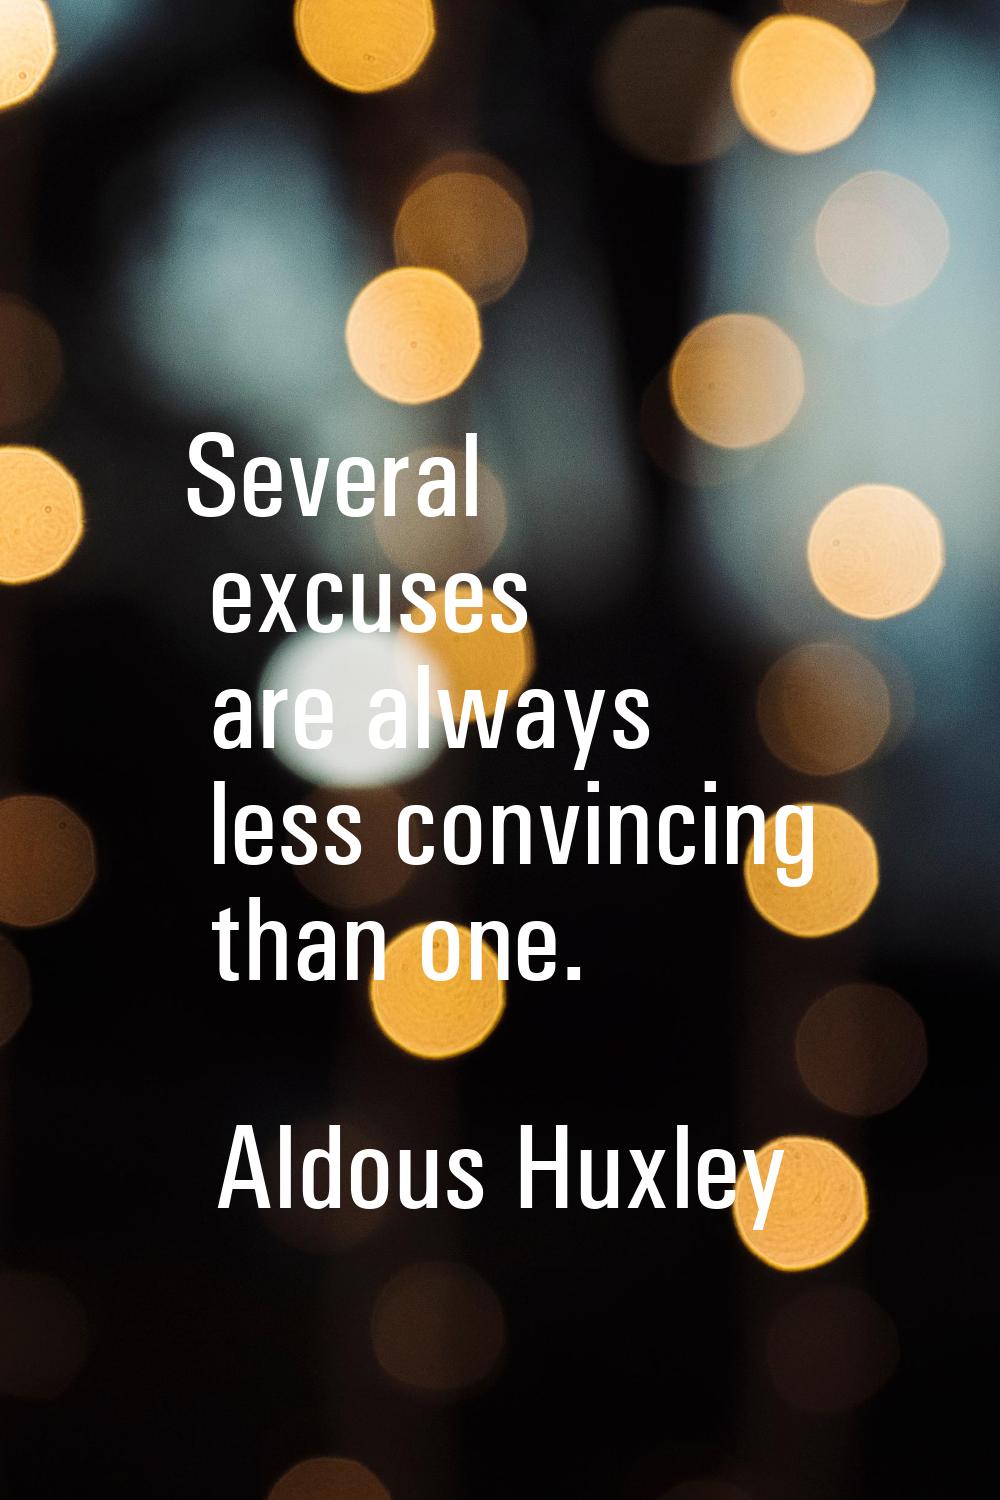 Several excuses are always less convincing than one.